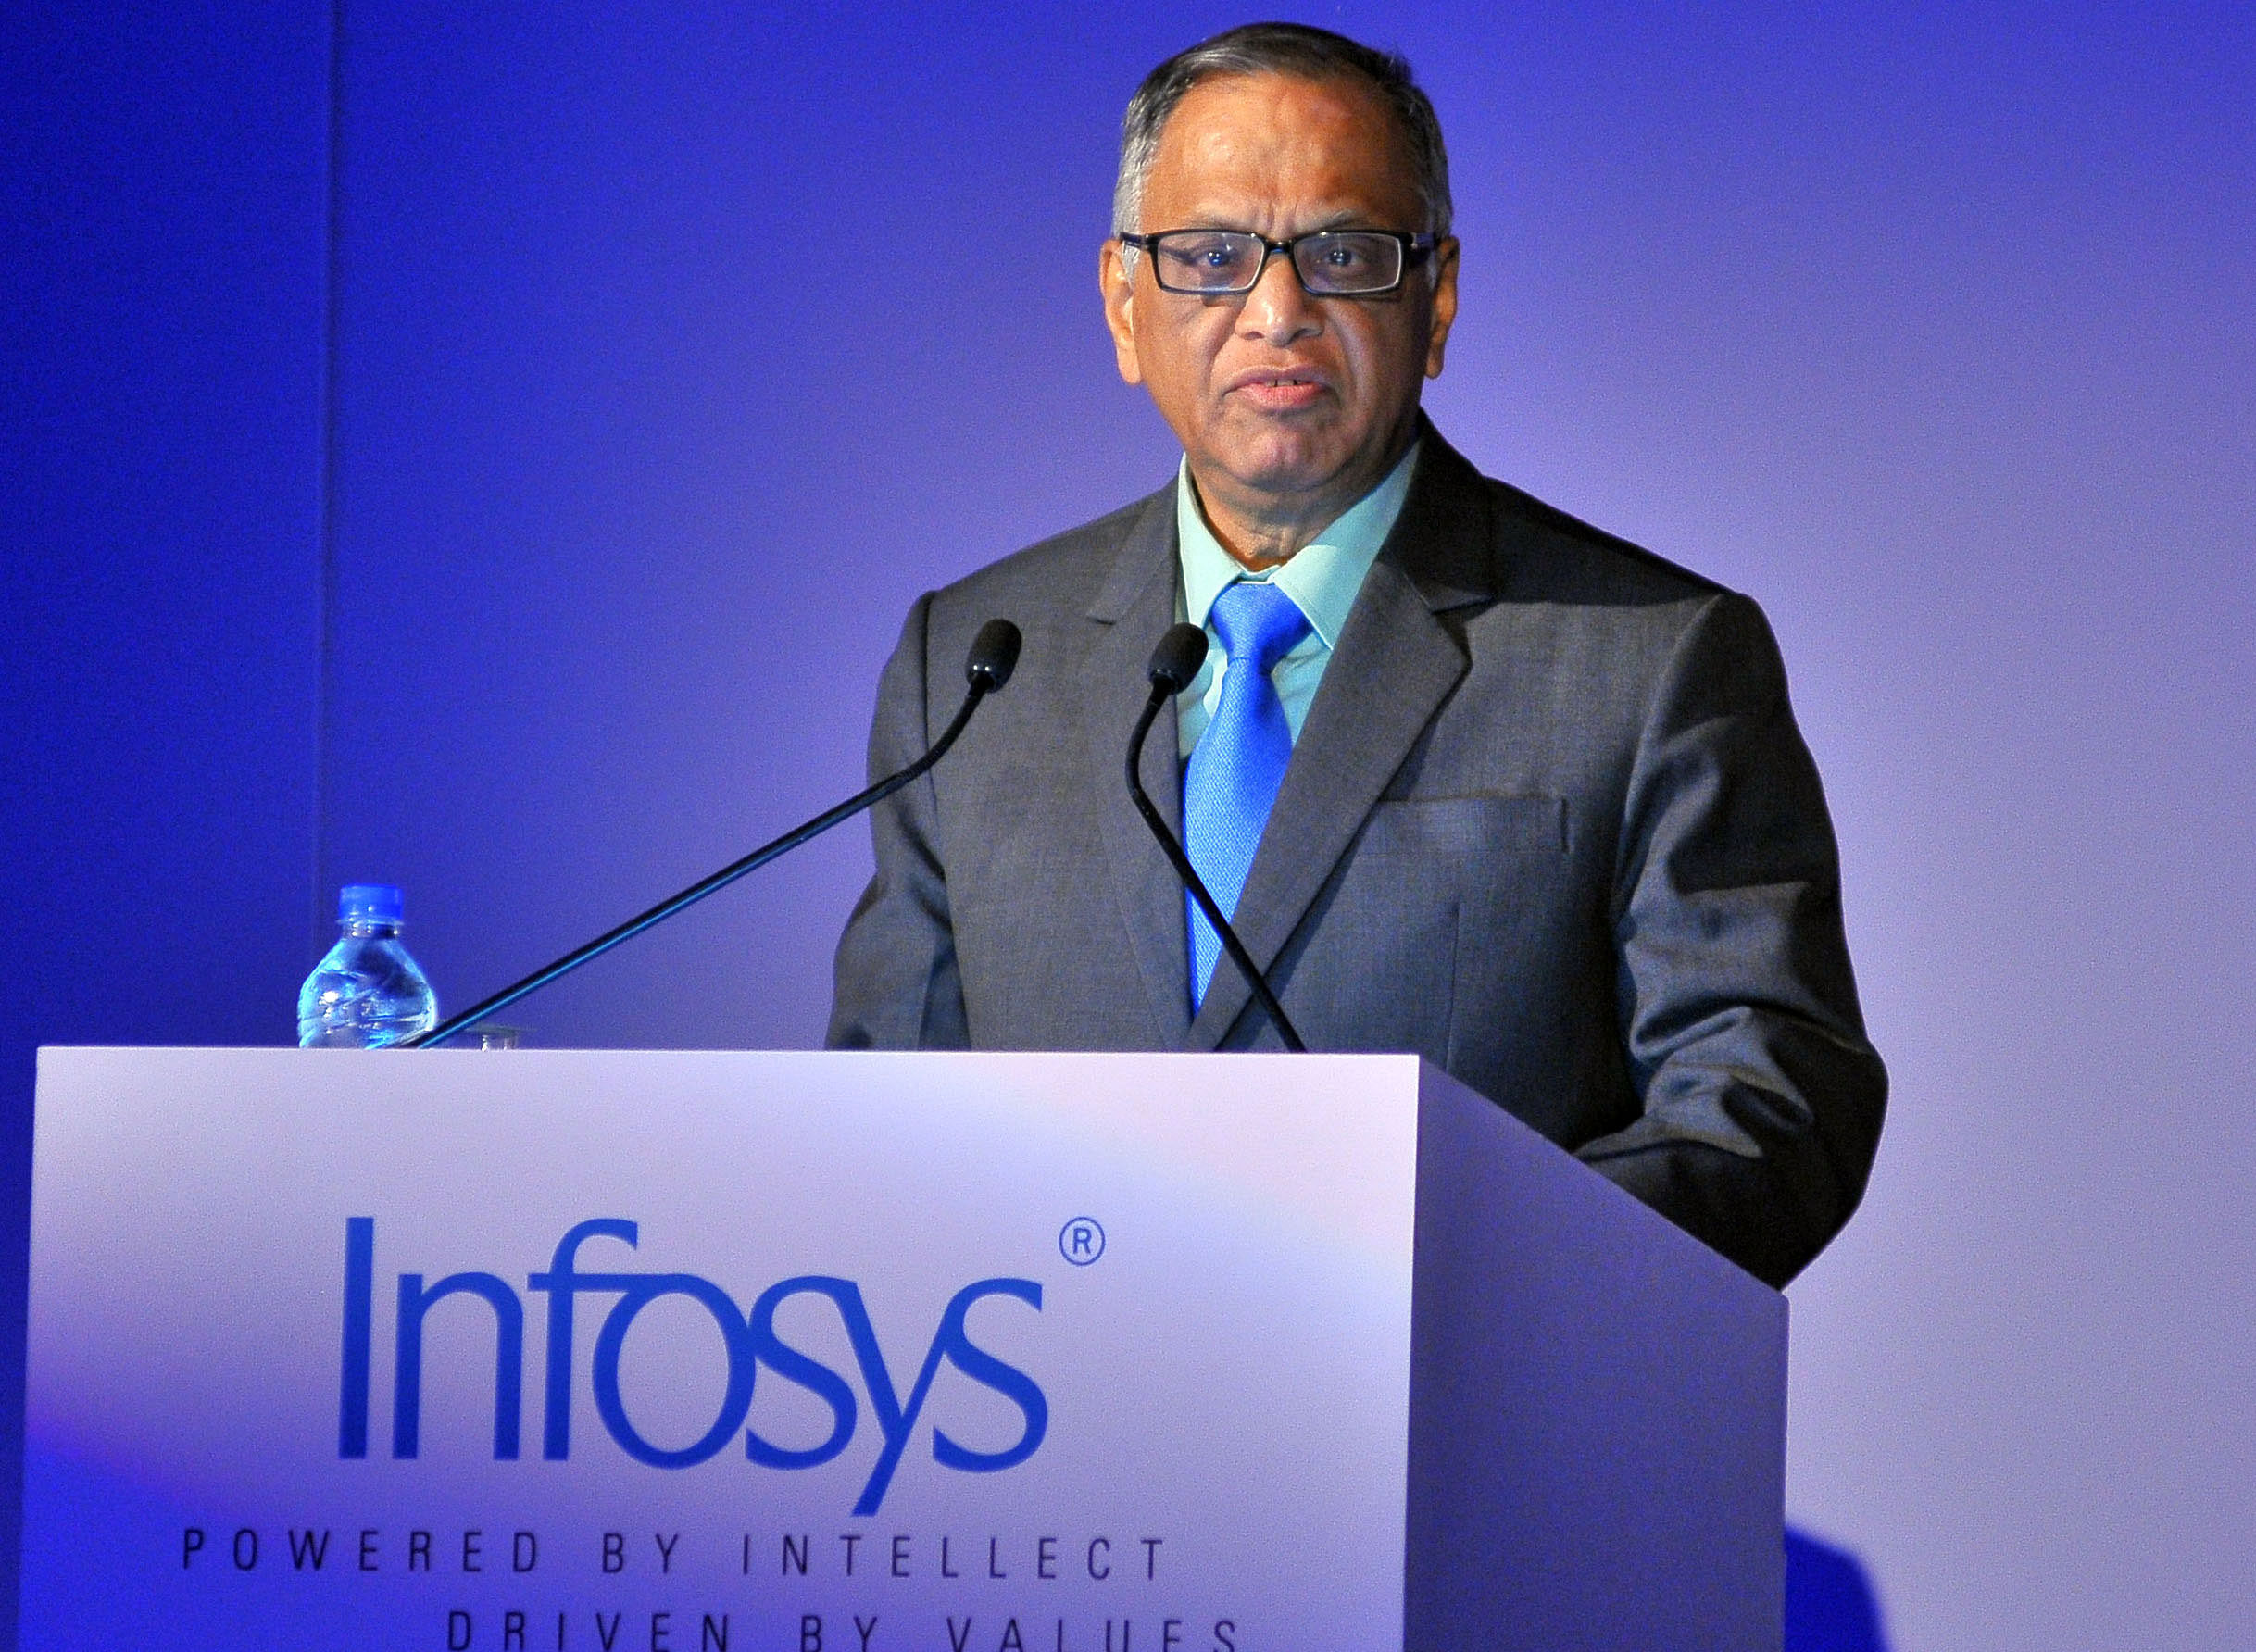 Three decades after floating and making Infosys a global software major, its founders led by N.R. Narayana Murthy are joining handsto promote philanthropy. DH File Photo